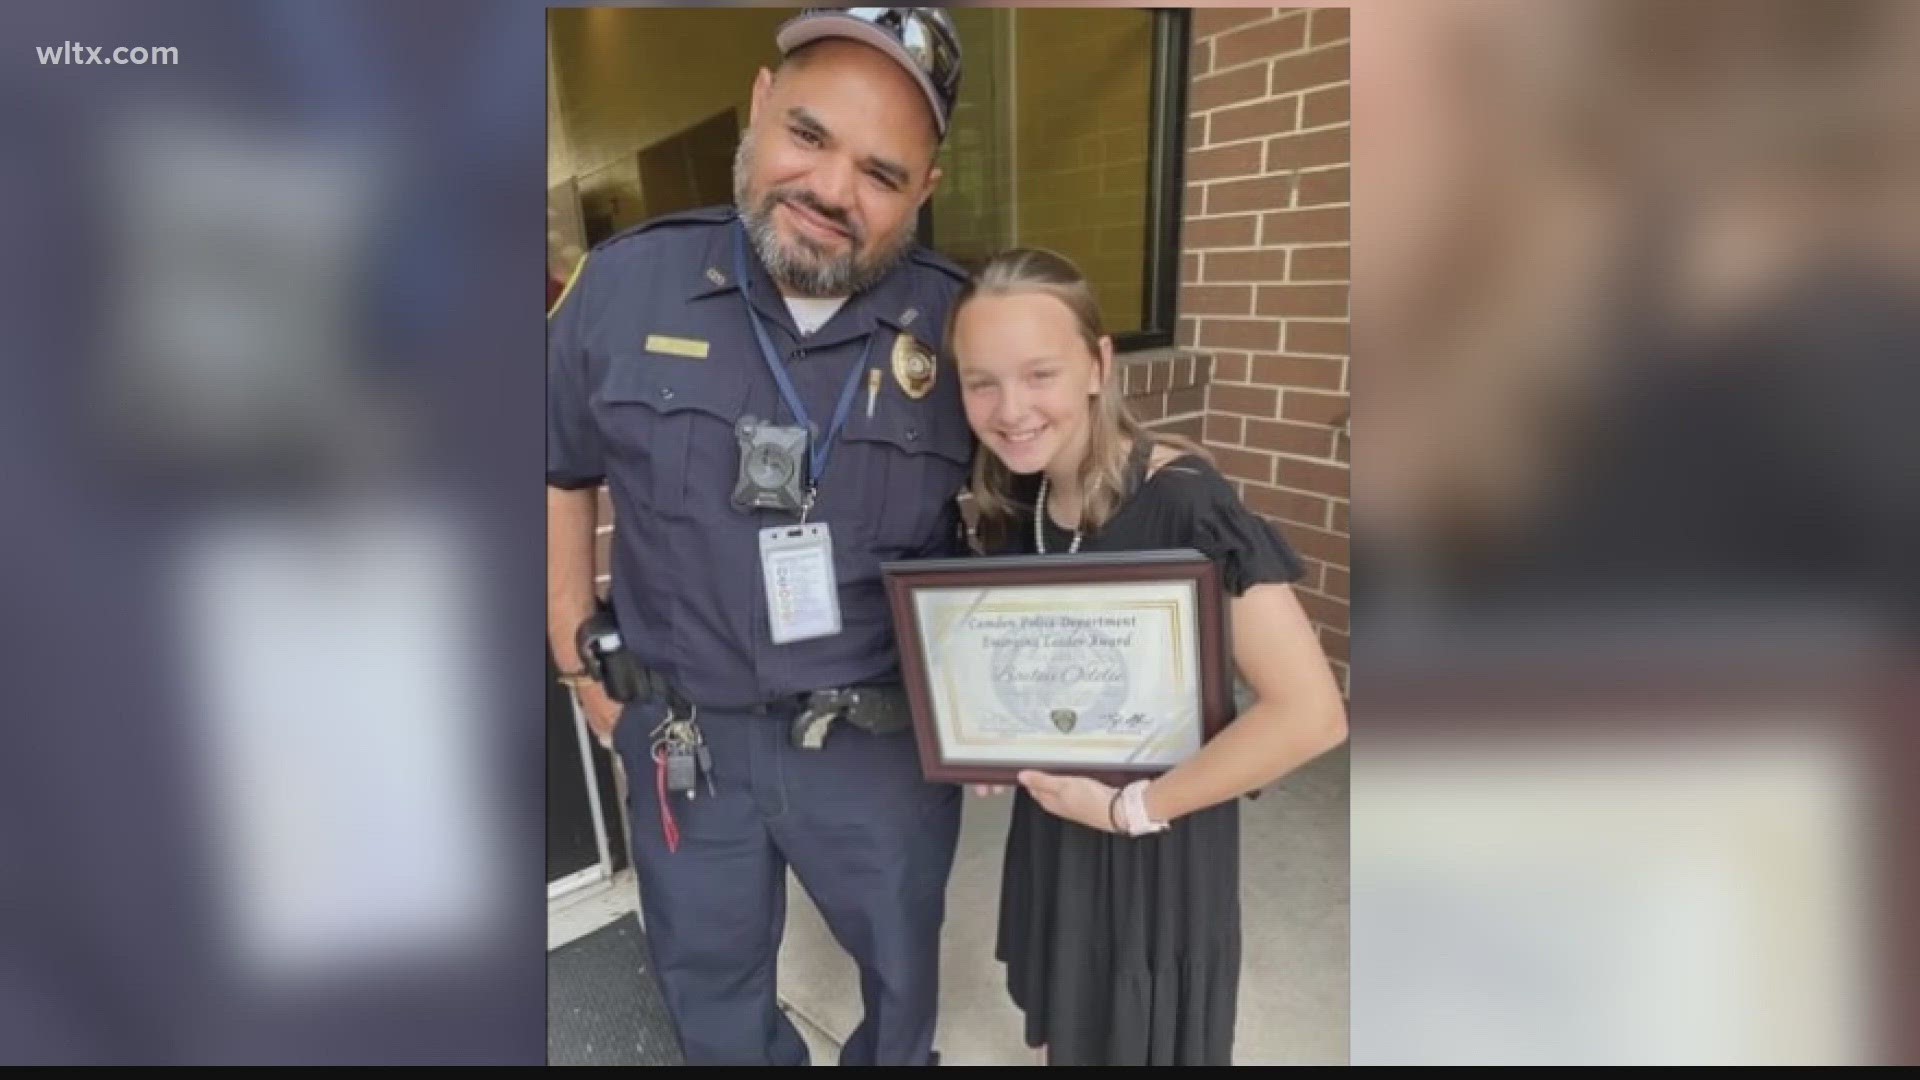 Camden Police said that 5th grader Bailey Oddie was awarded the department's engaging leader award.